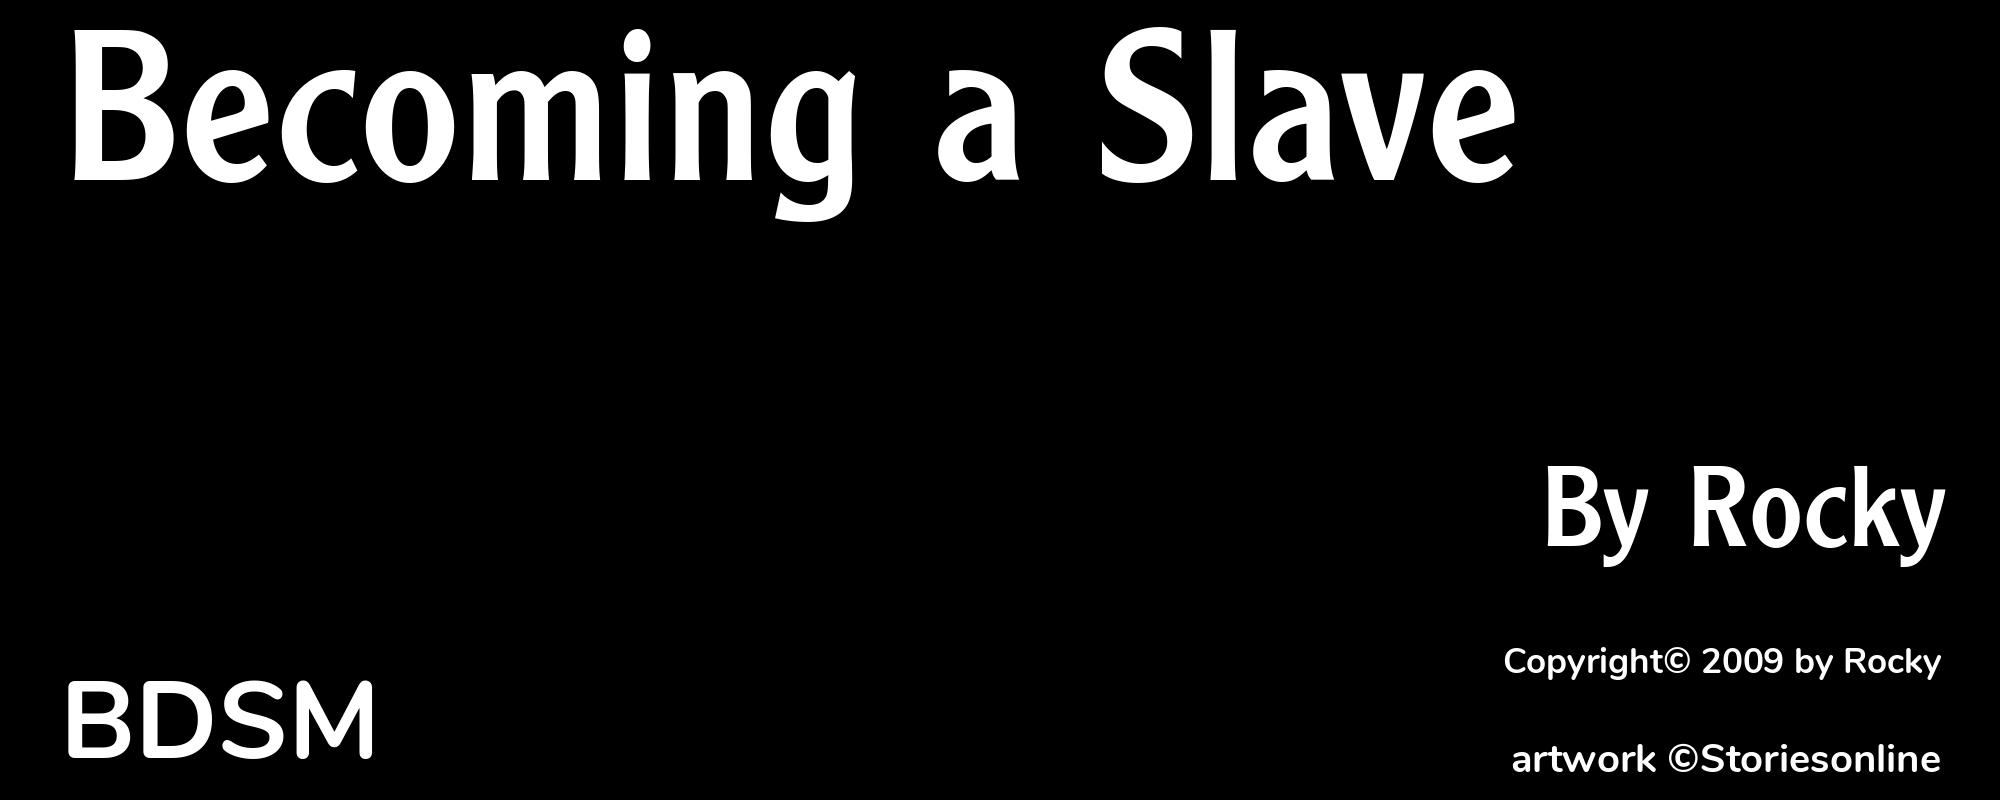 Becoming a Slave - Cover